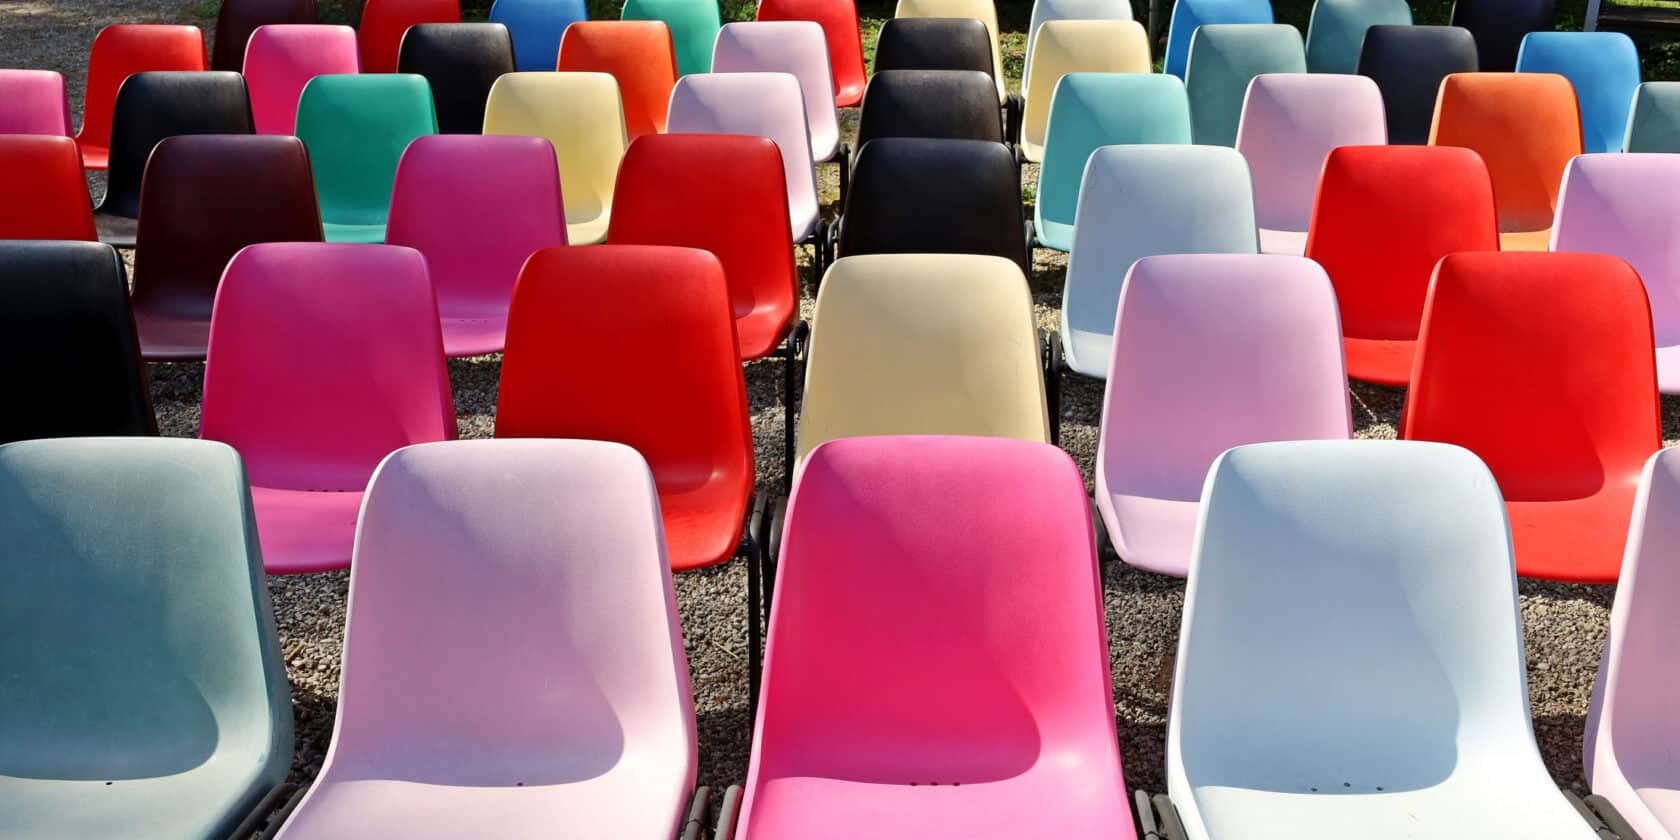 Colorful plastic chairs.